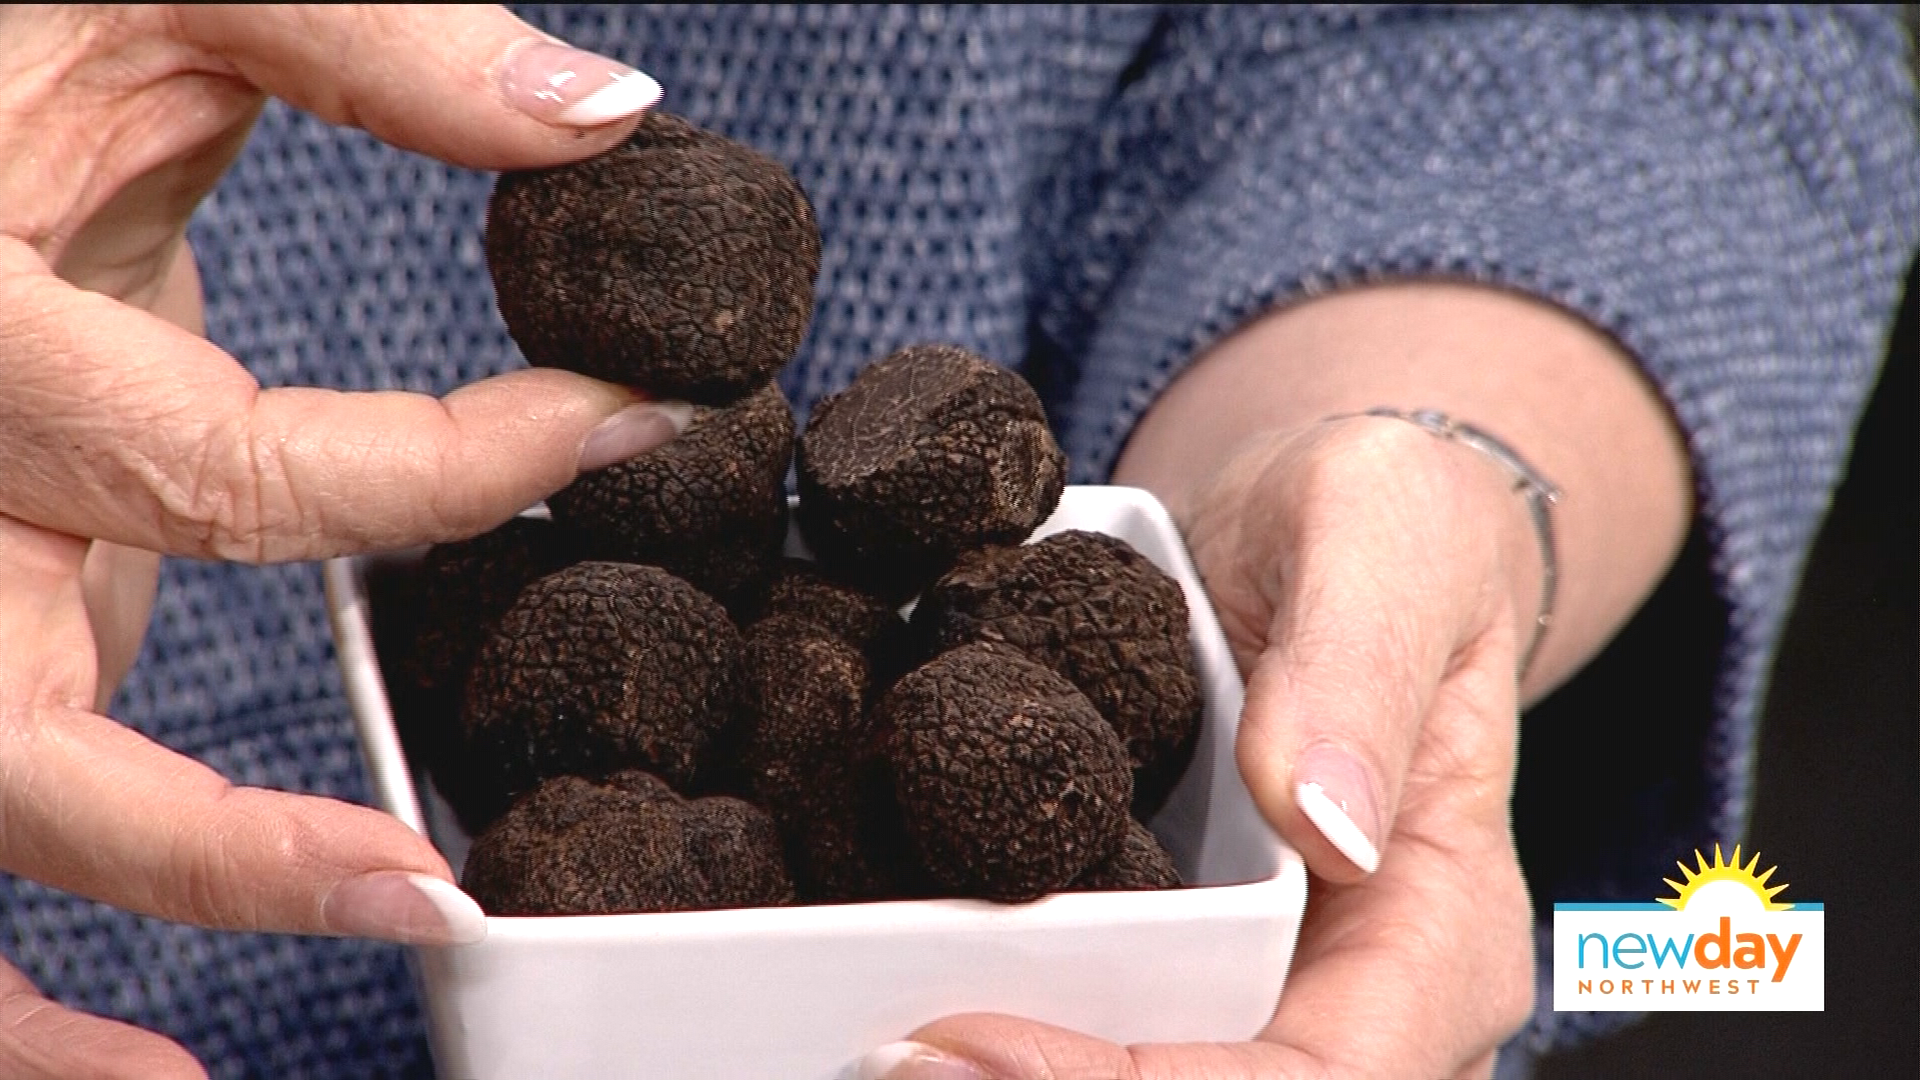 Pike Place Market's Truffle Queen helps us mix this fancy food into our favorite dishes.  Stop by Truffle Queen to get the best truffle products and dishes at 1524 Pike Place, Seattle.